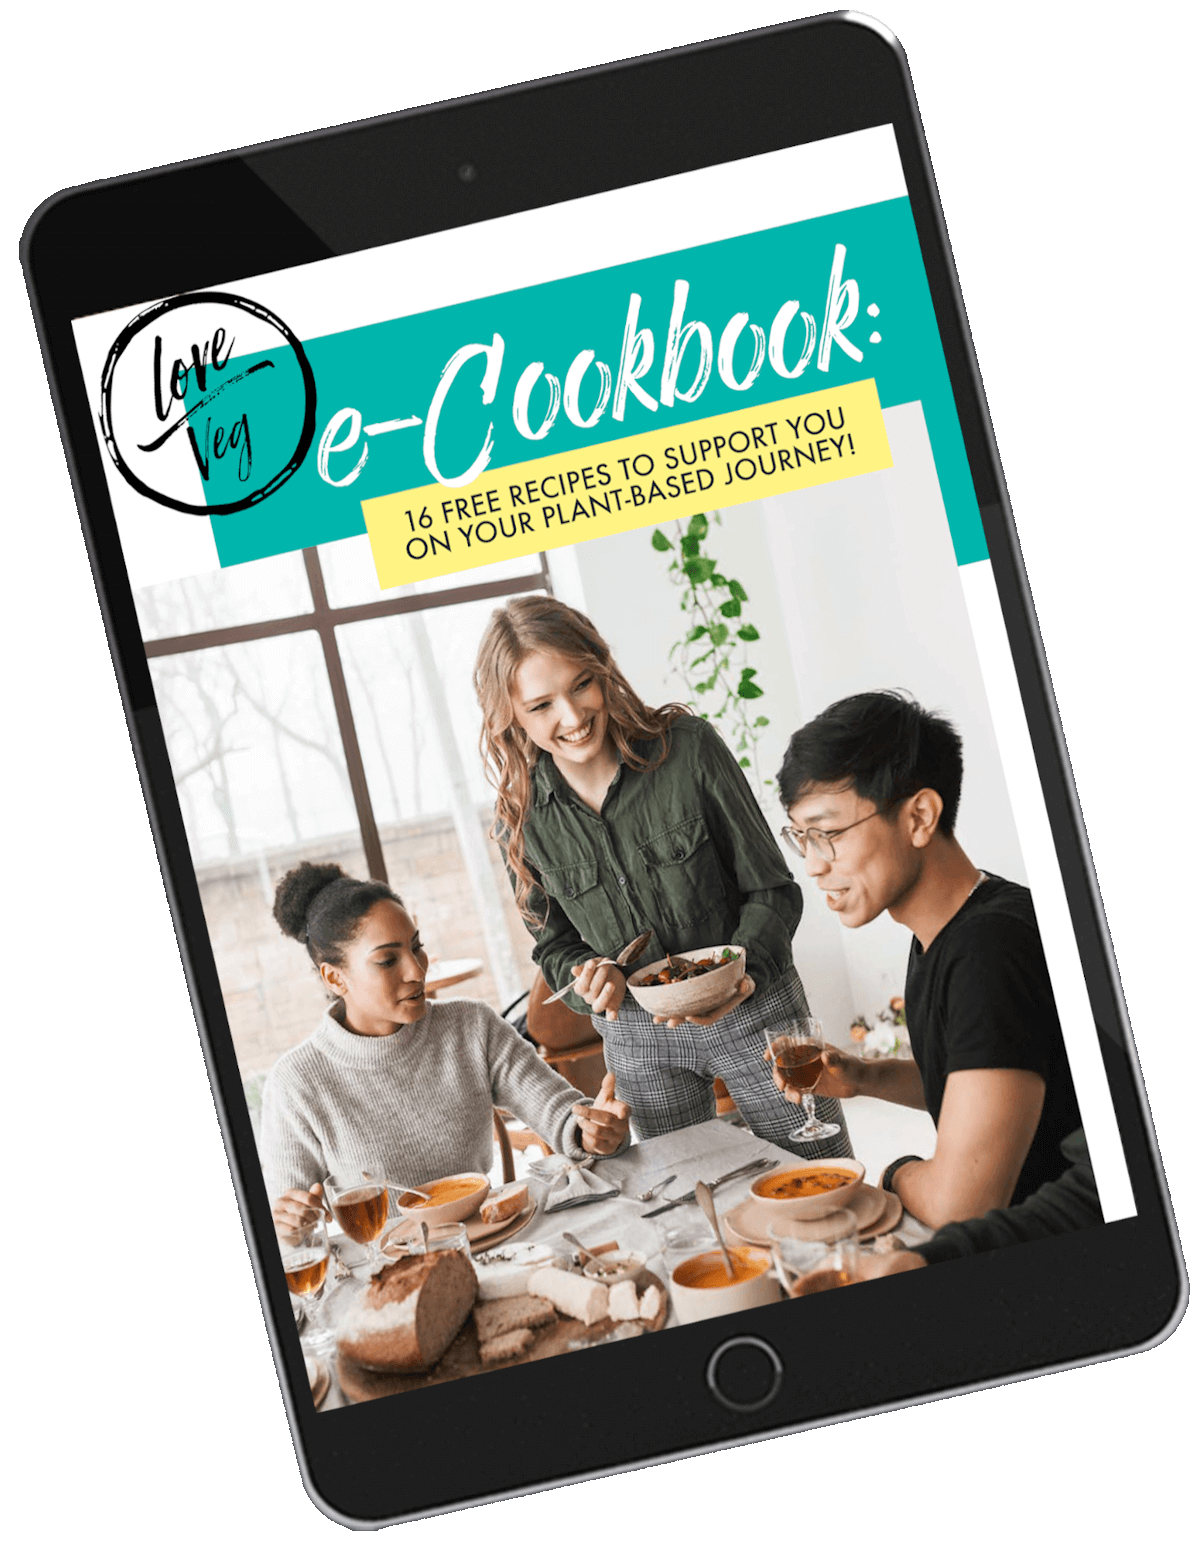 Preview of e-cookbook with vegan recipes on a tablet pc